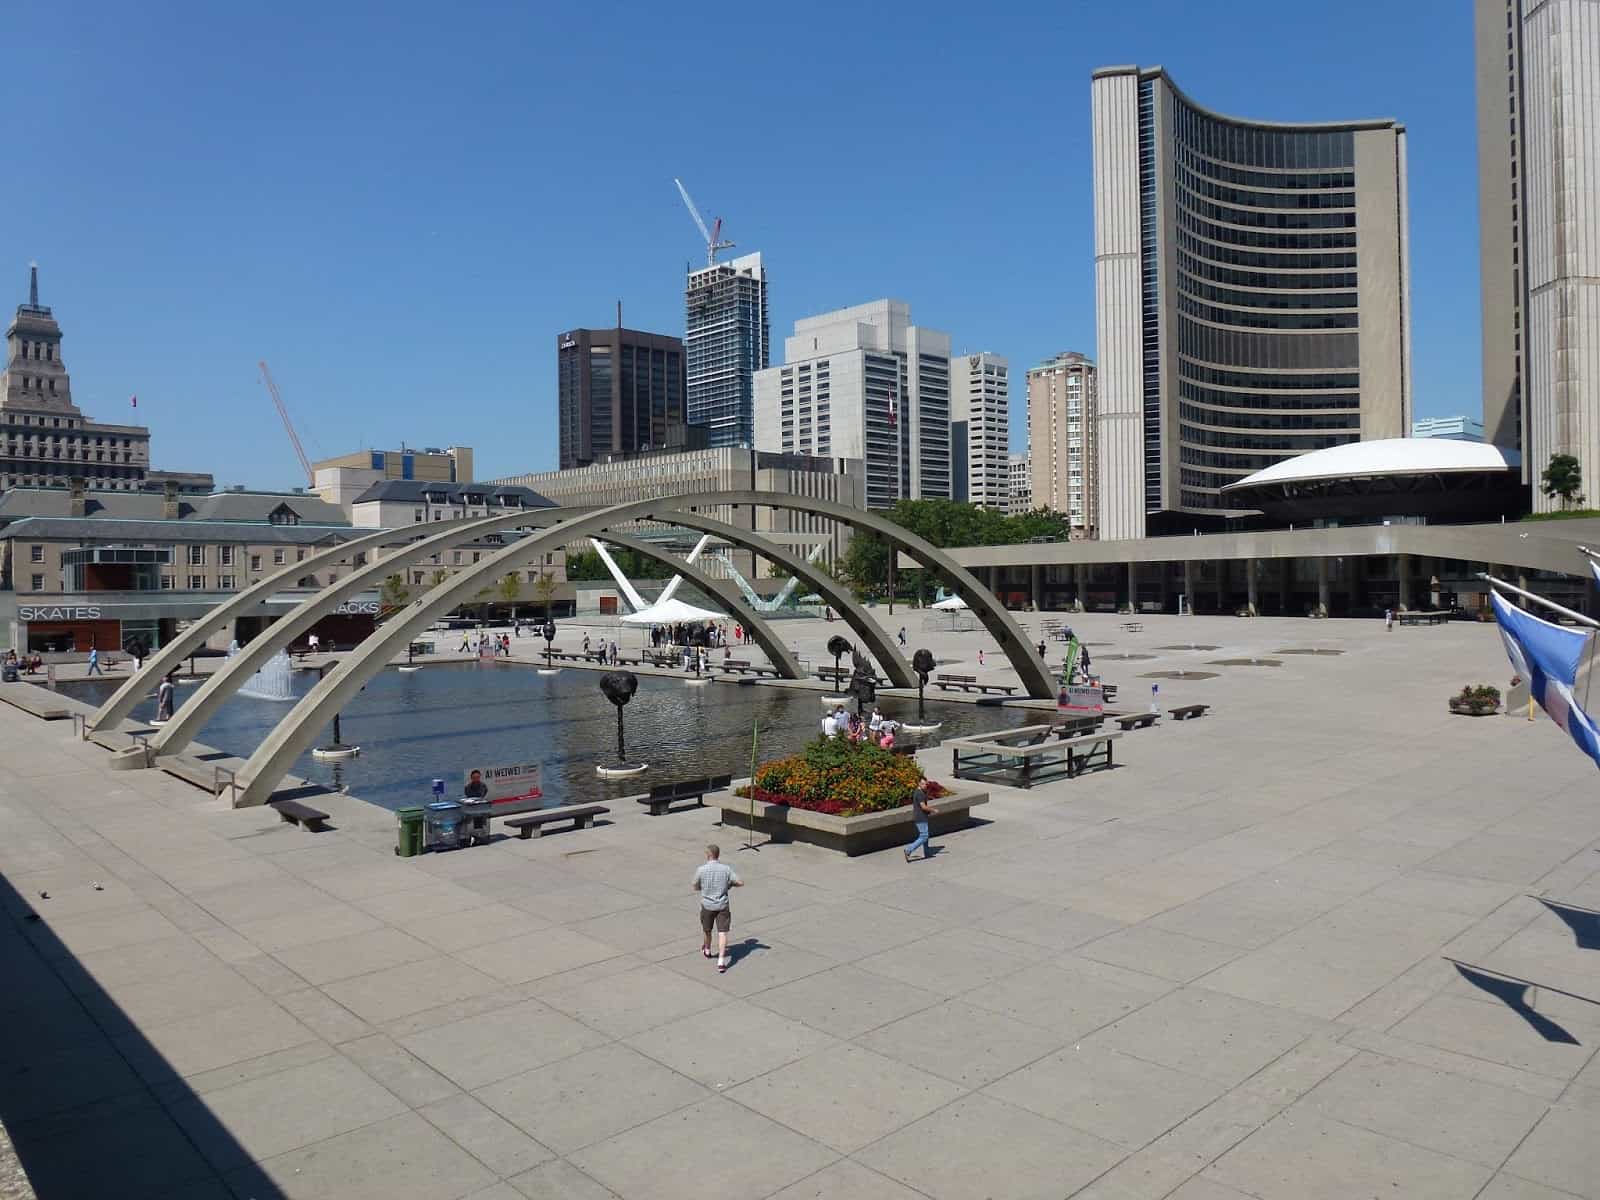 Nathan Phillips Square in Toronto, Ontario, Canada